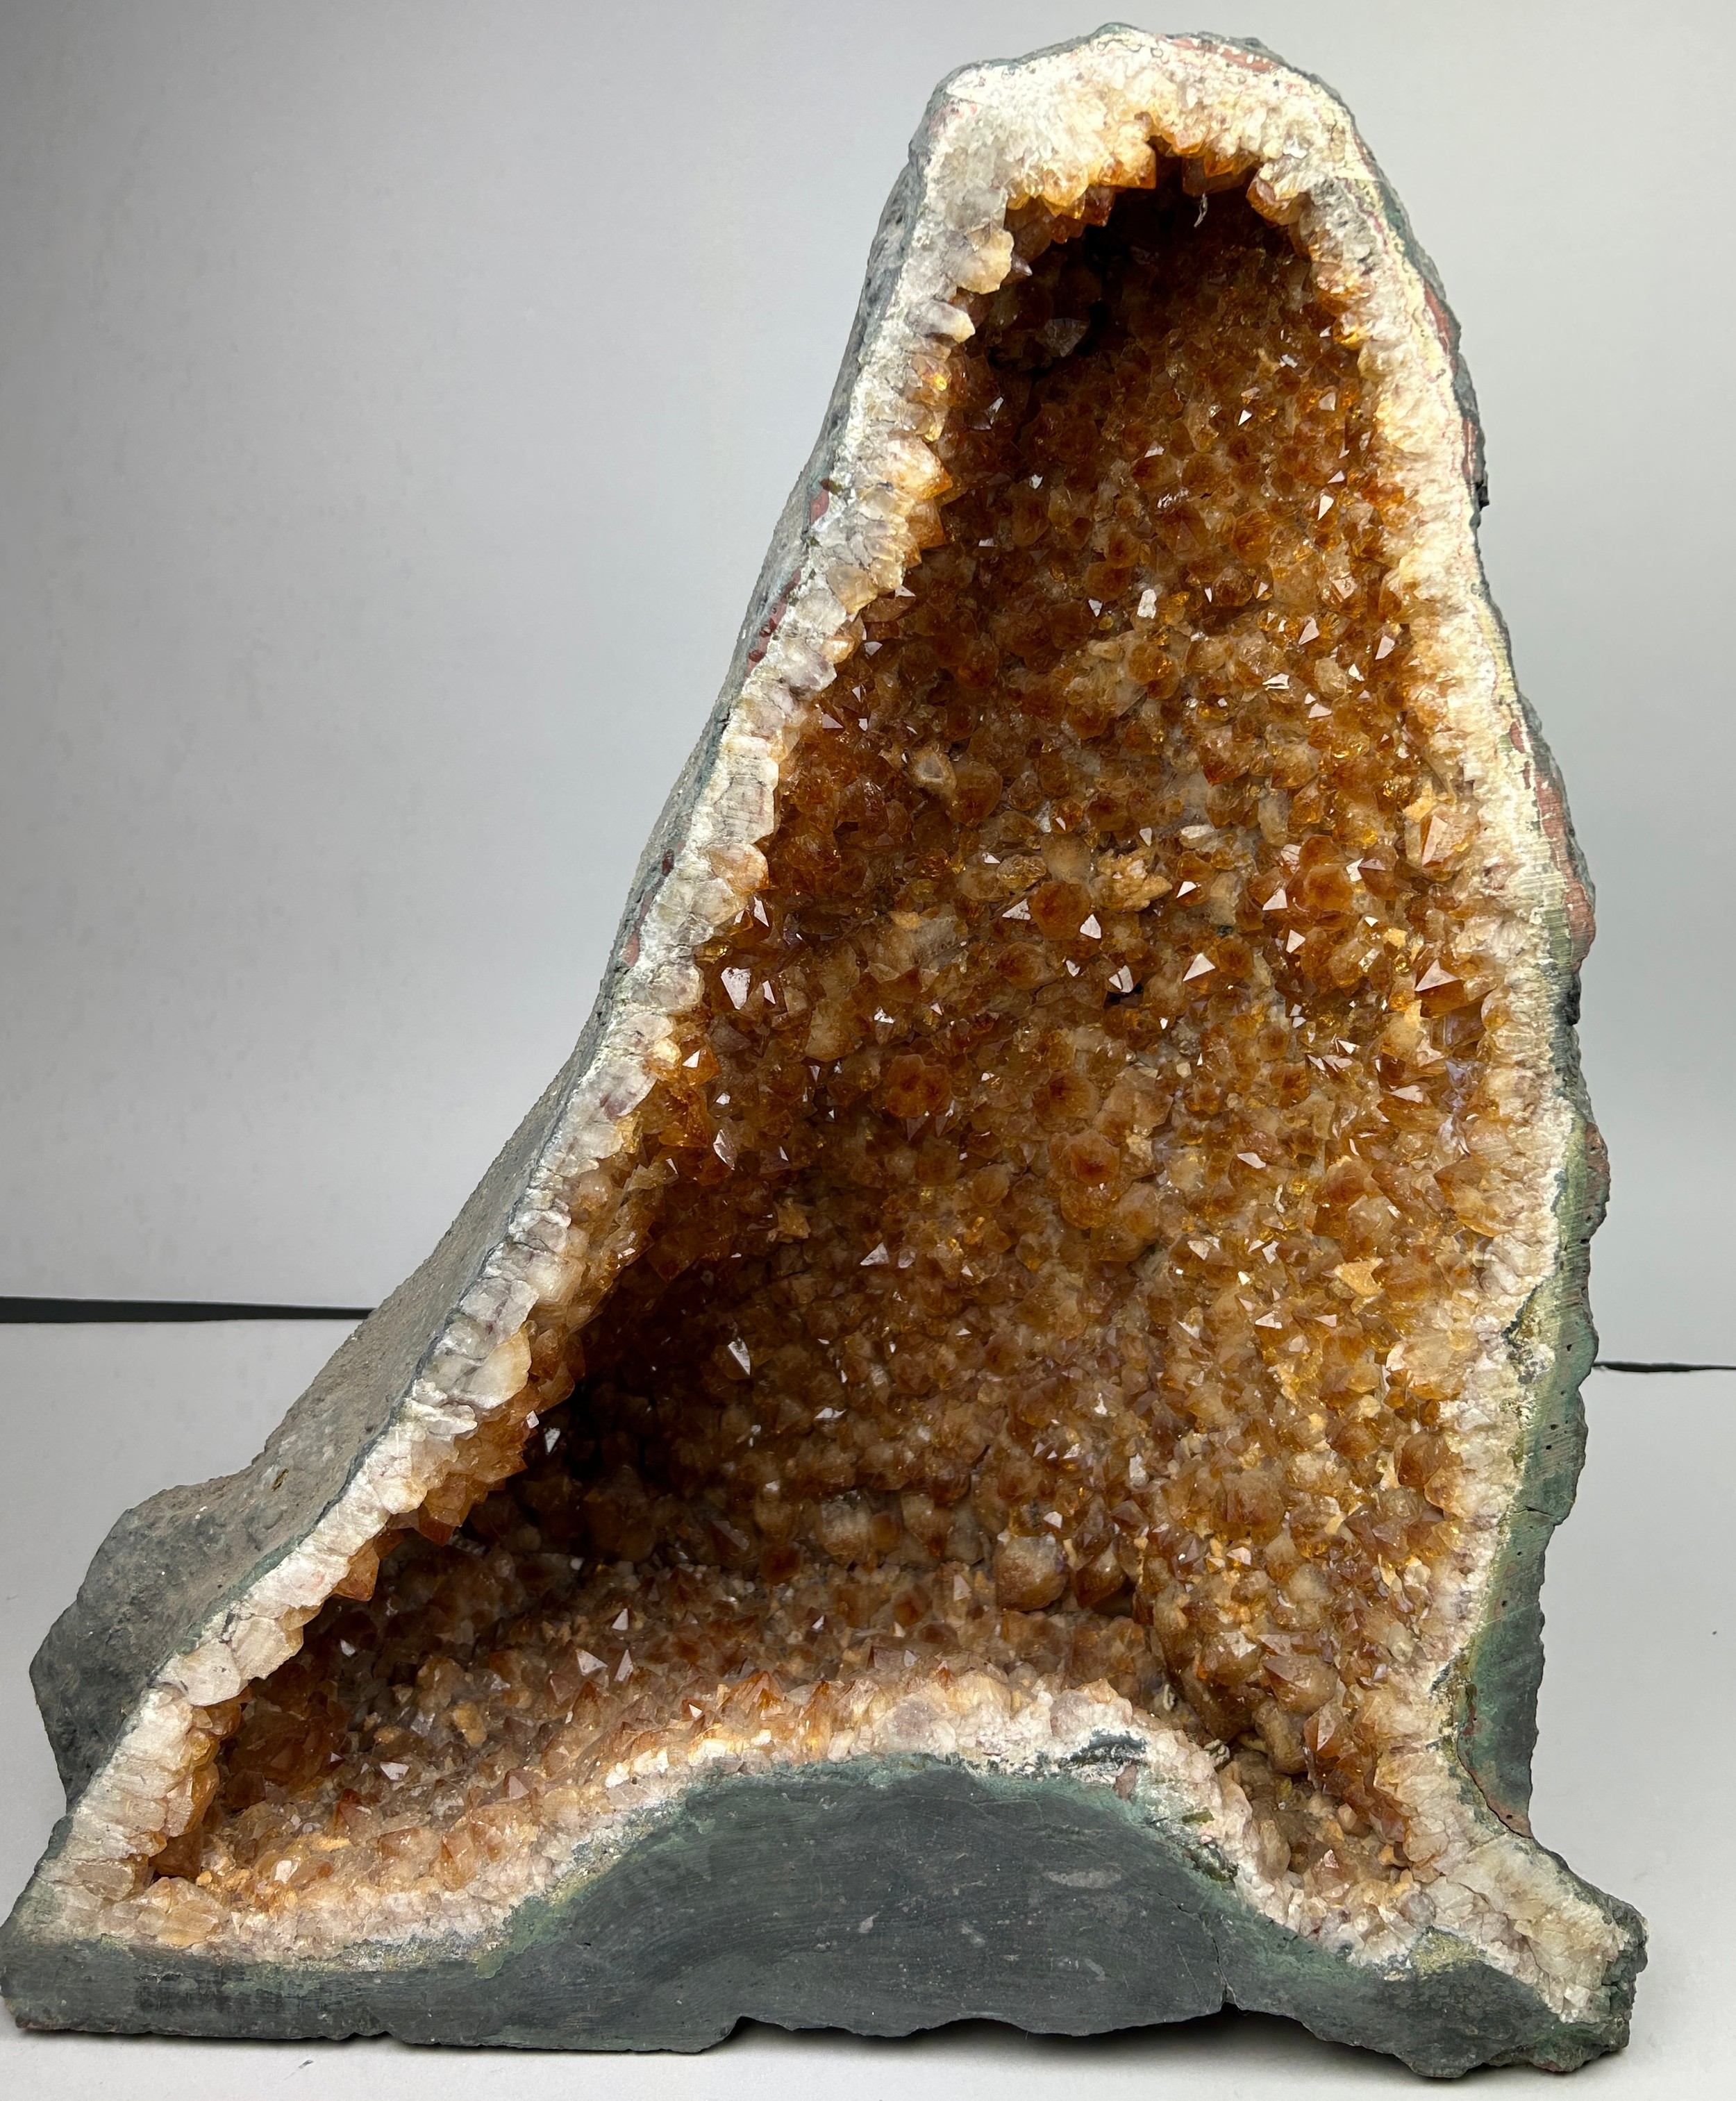 A LARGE CITRINE AMETHYST GEODE 'CATHEDRAL' 59cm x 57cm